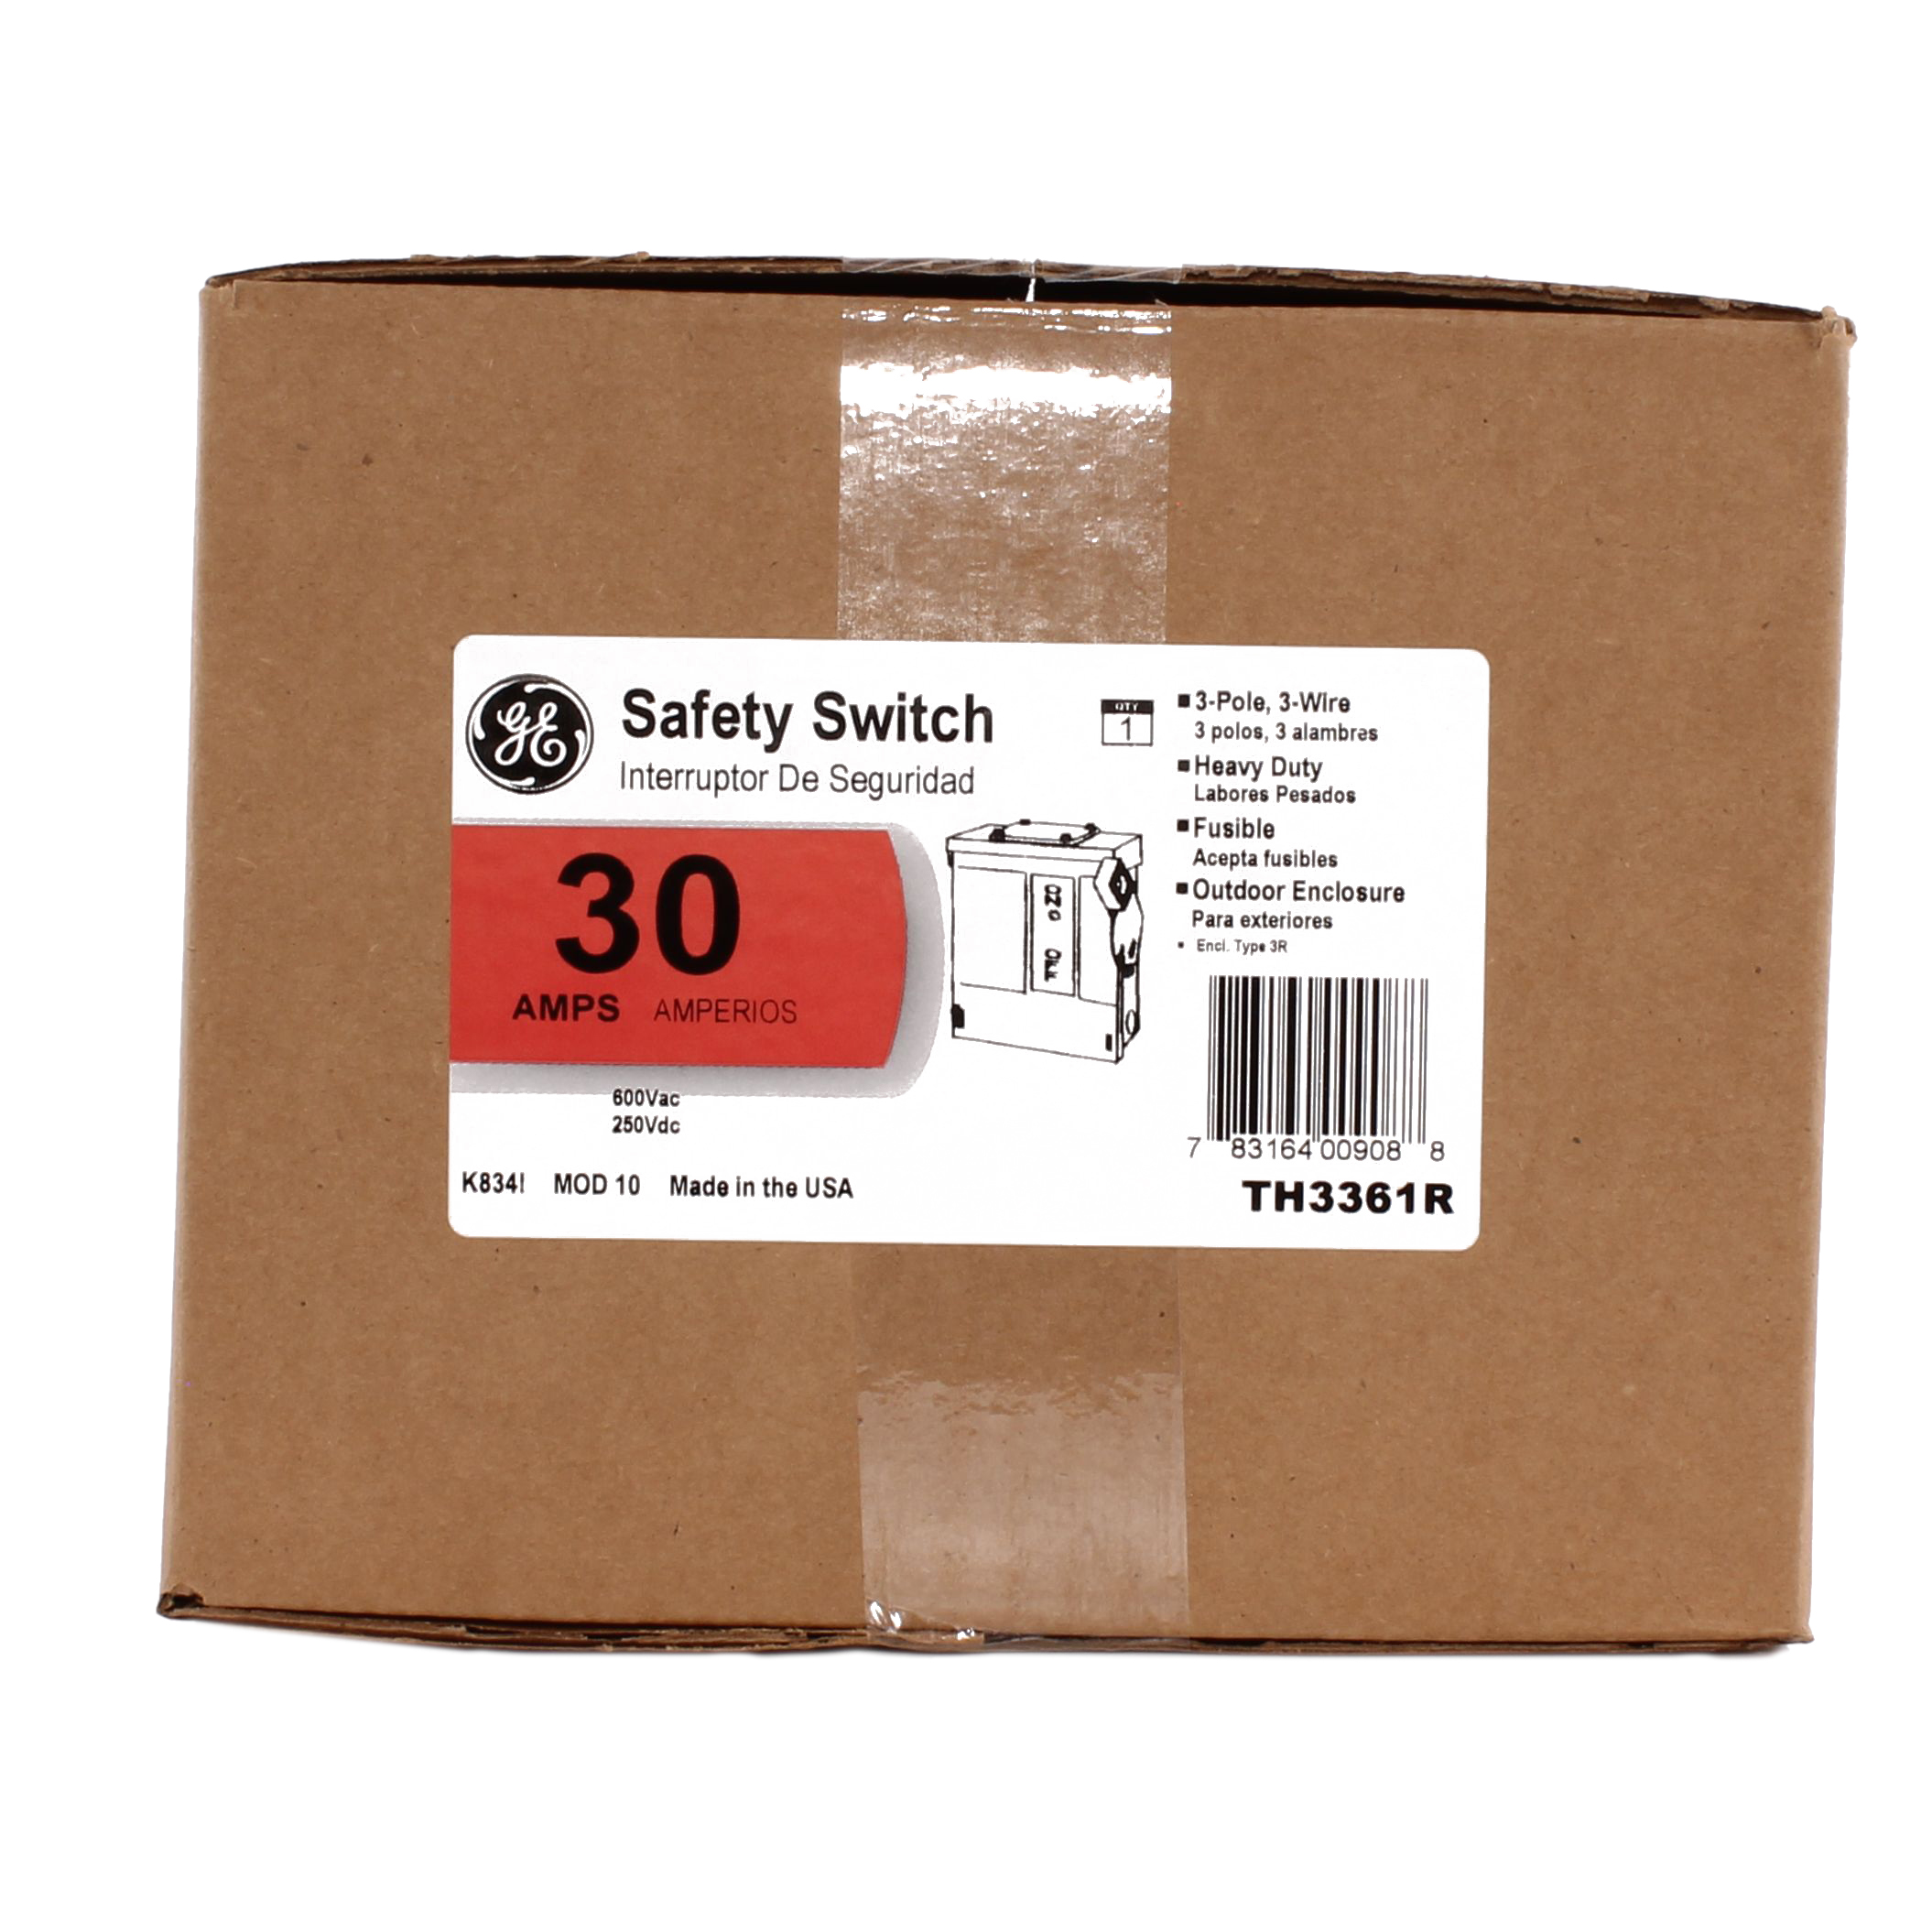 GEE TH3361R 3 POLE 600V 30 AMP FUSIBLE TYPE 3R SWITCH 3PH